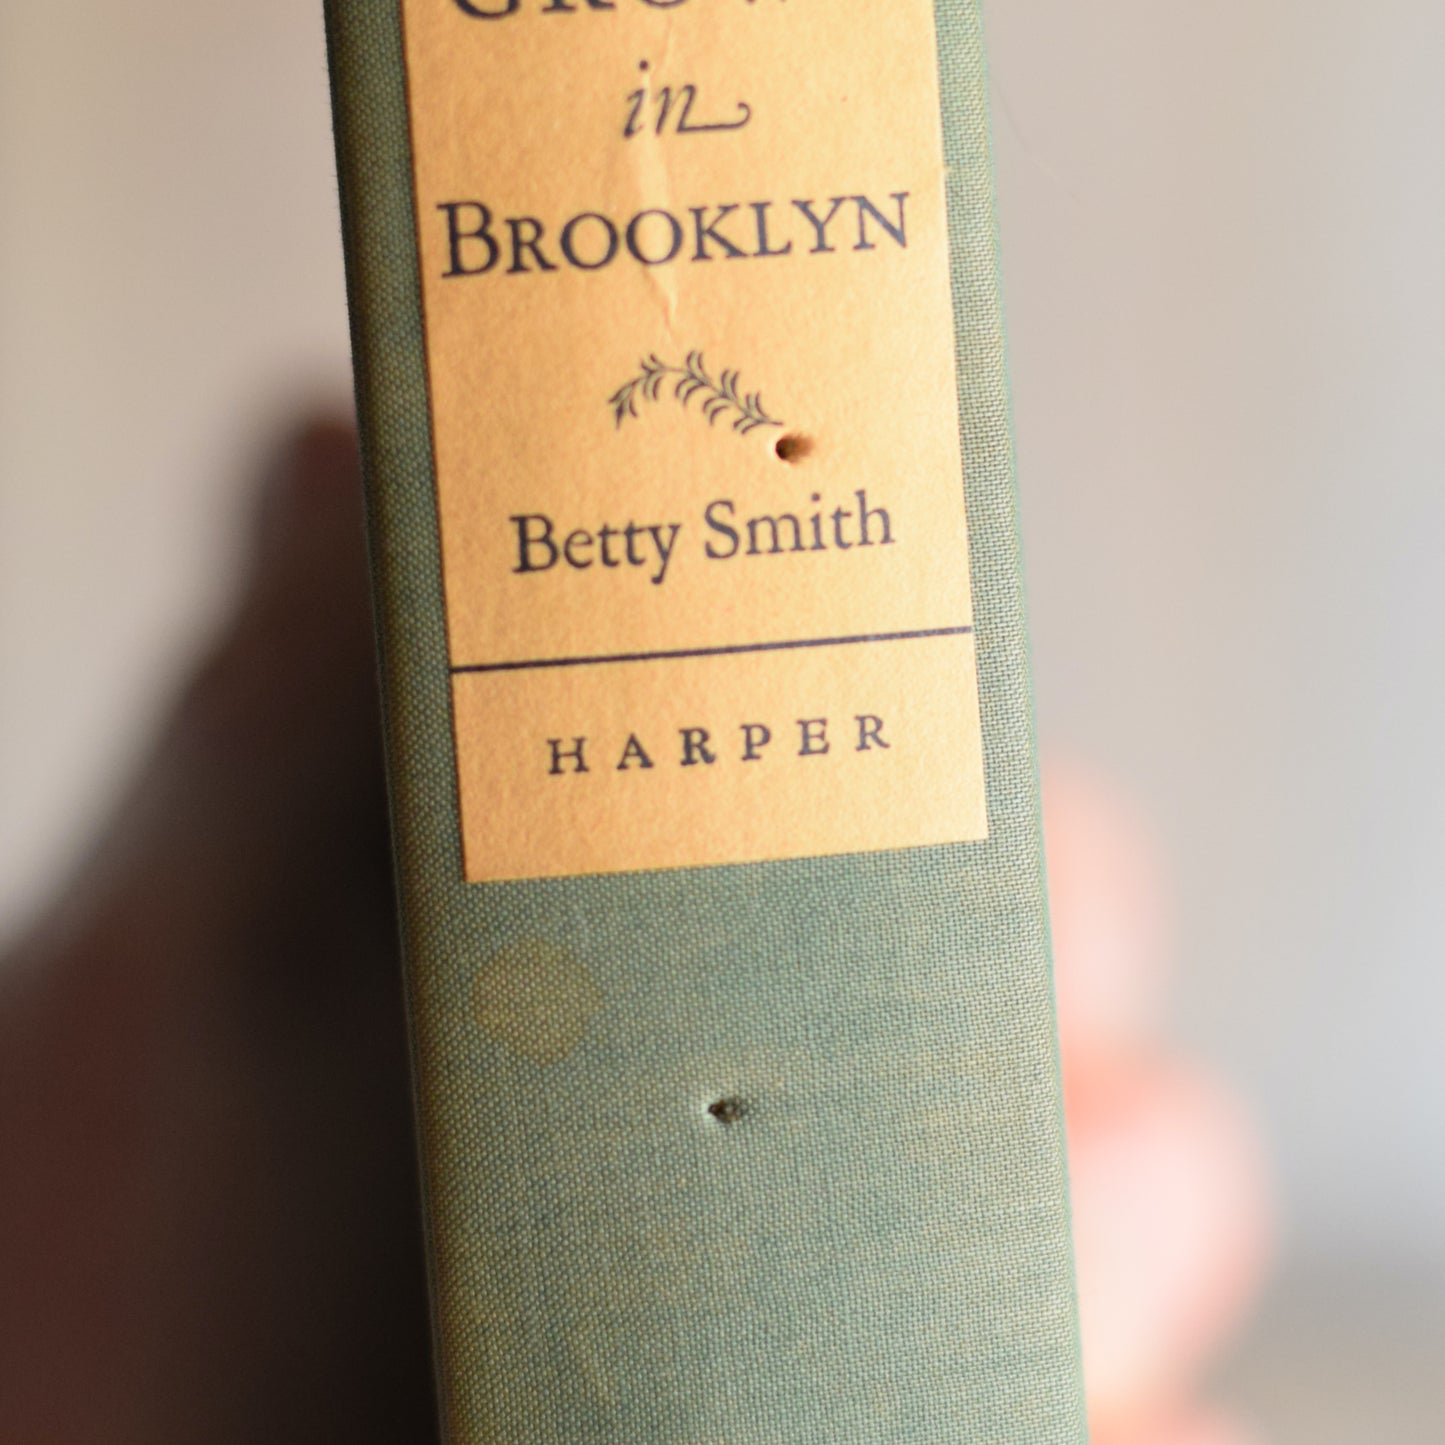 Antique Fiction Hardback: Betty Smith - A Tree Grows in Brooklyn FIRST EDITION